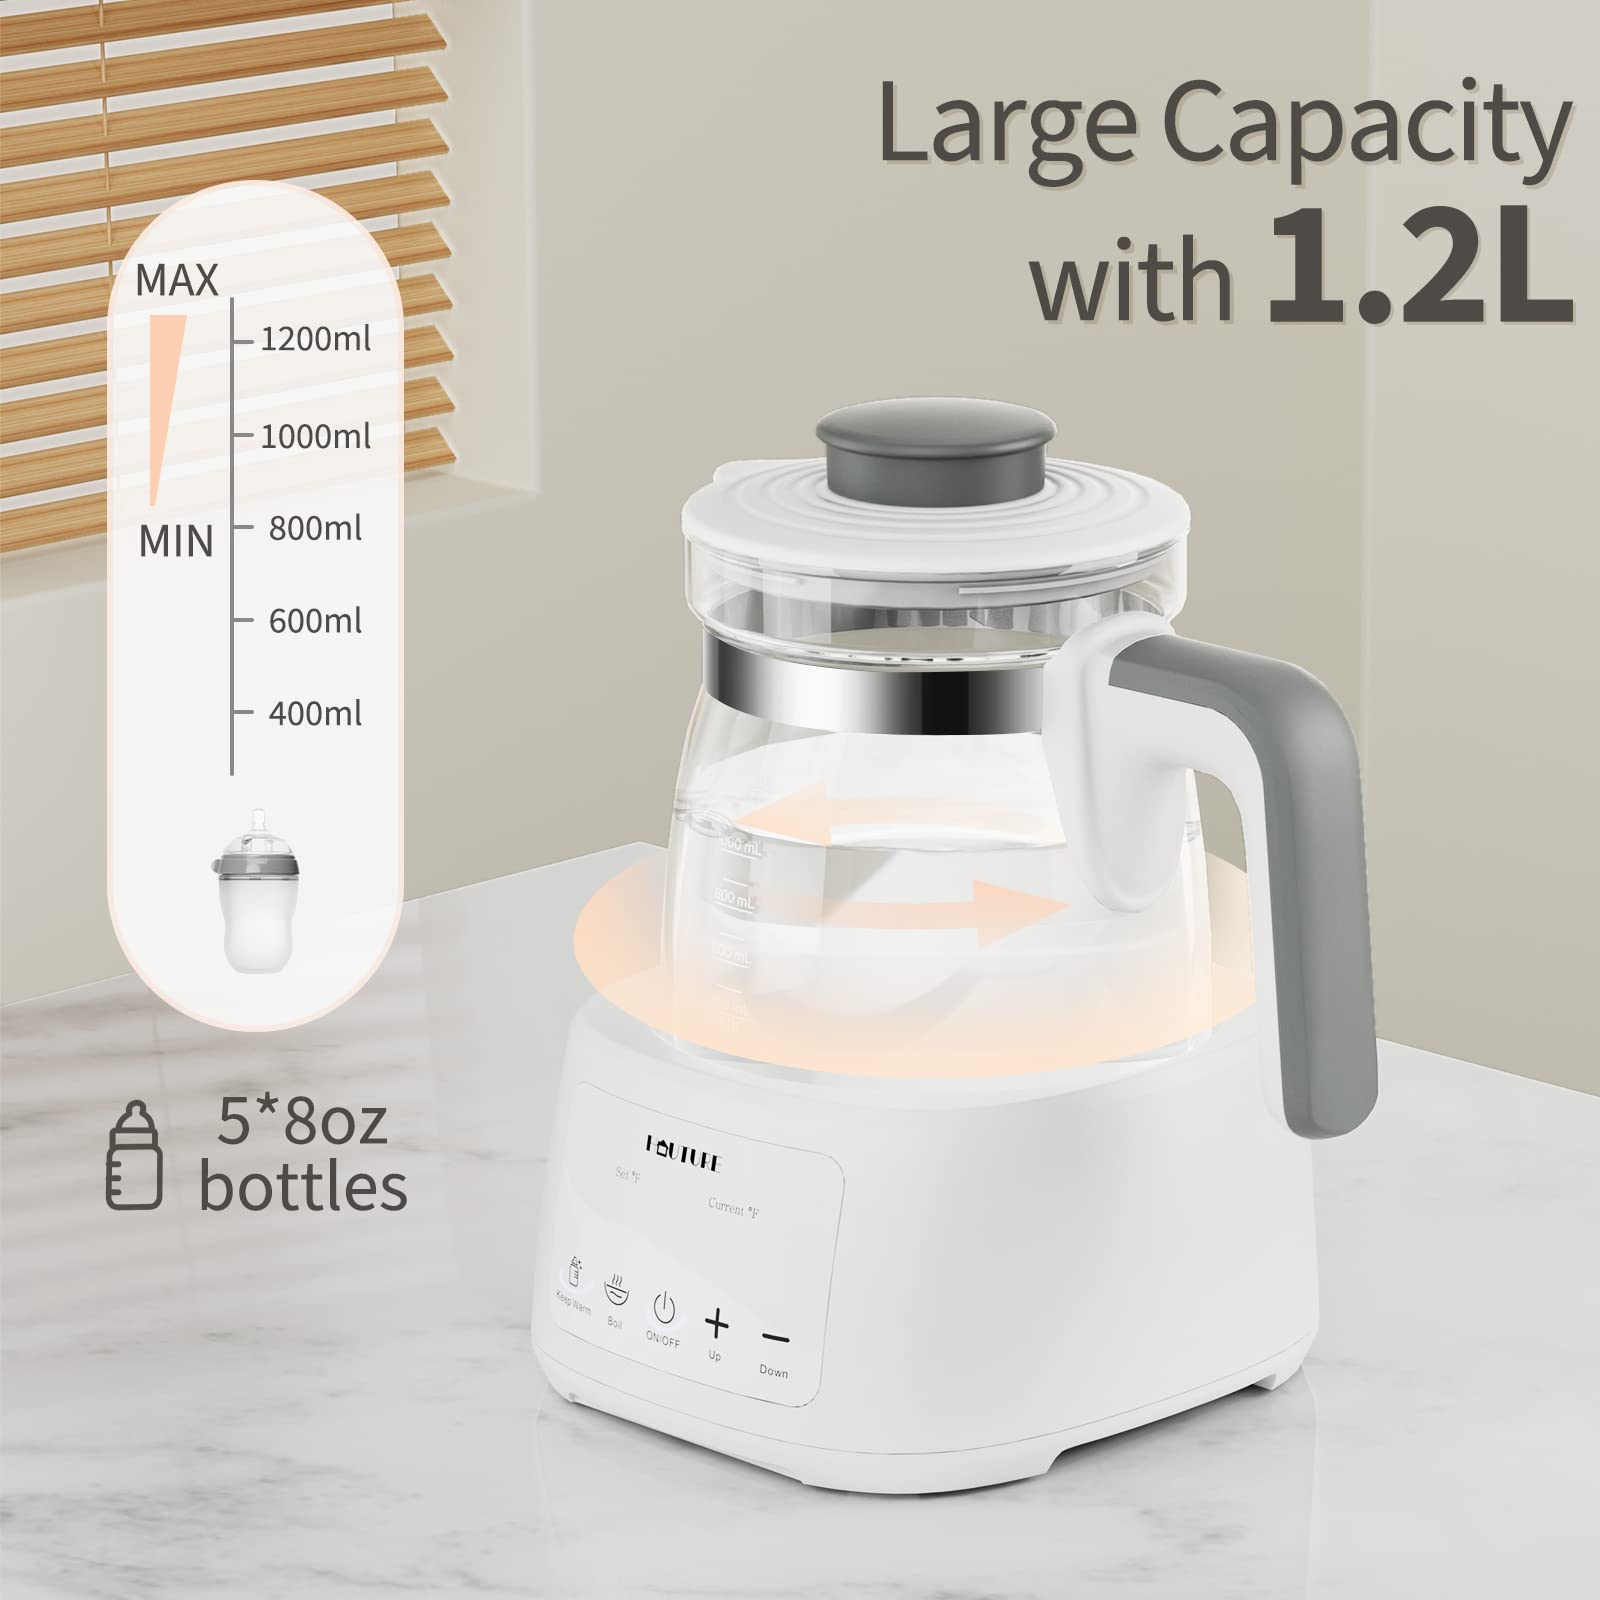 HAUTURE Instant Water Warmer – Replaces Traditional Baby Bottle Warmers - Advanced Formula Dispenser Machine Warm Water at Perfect Temperature in Fahrenheit